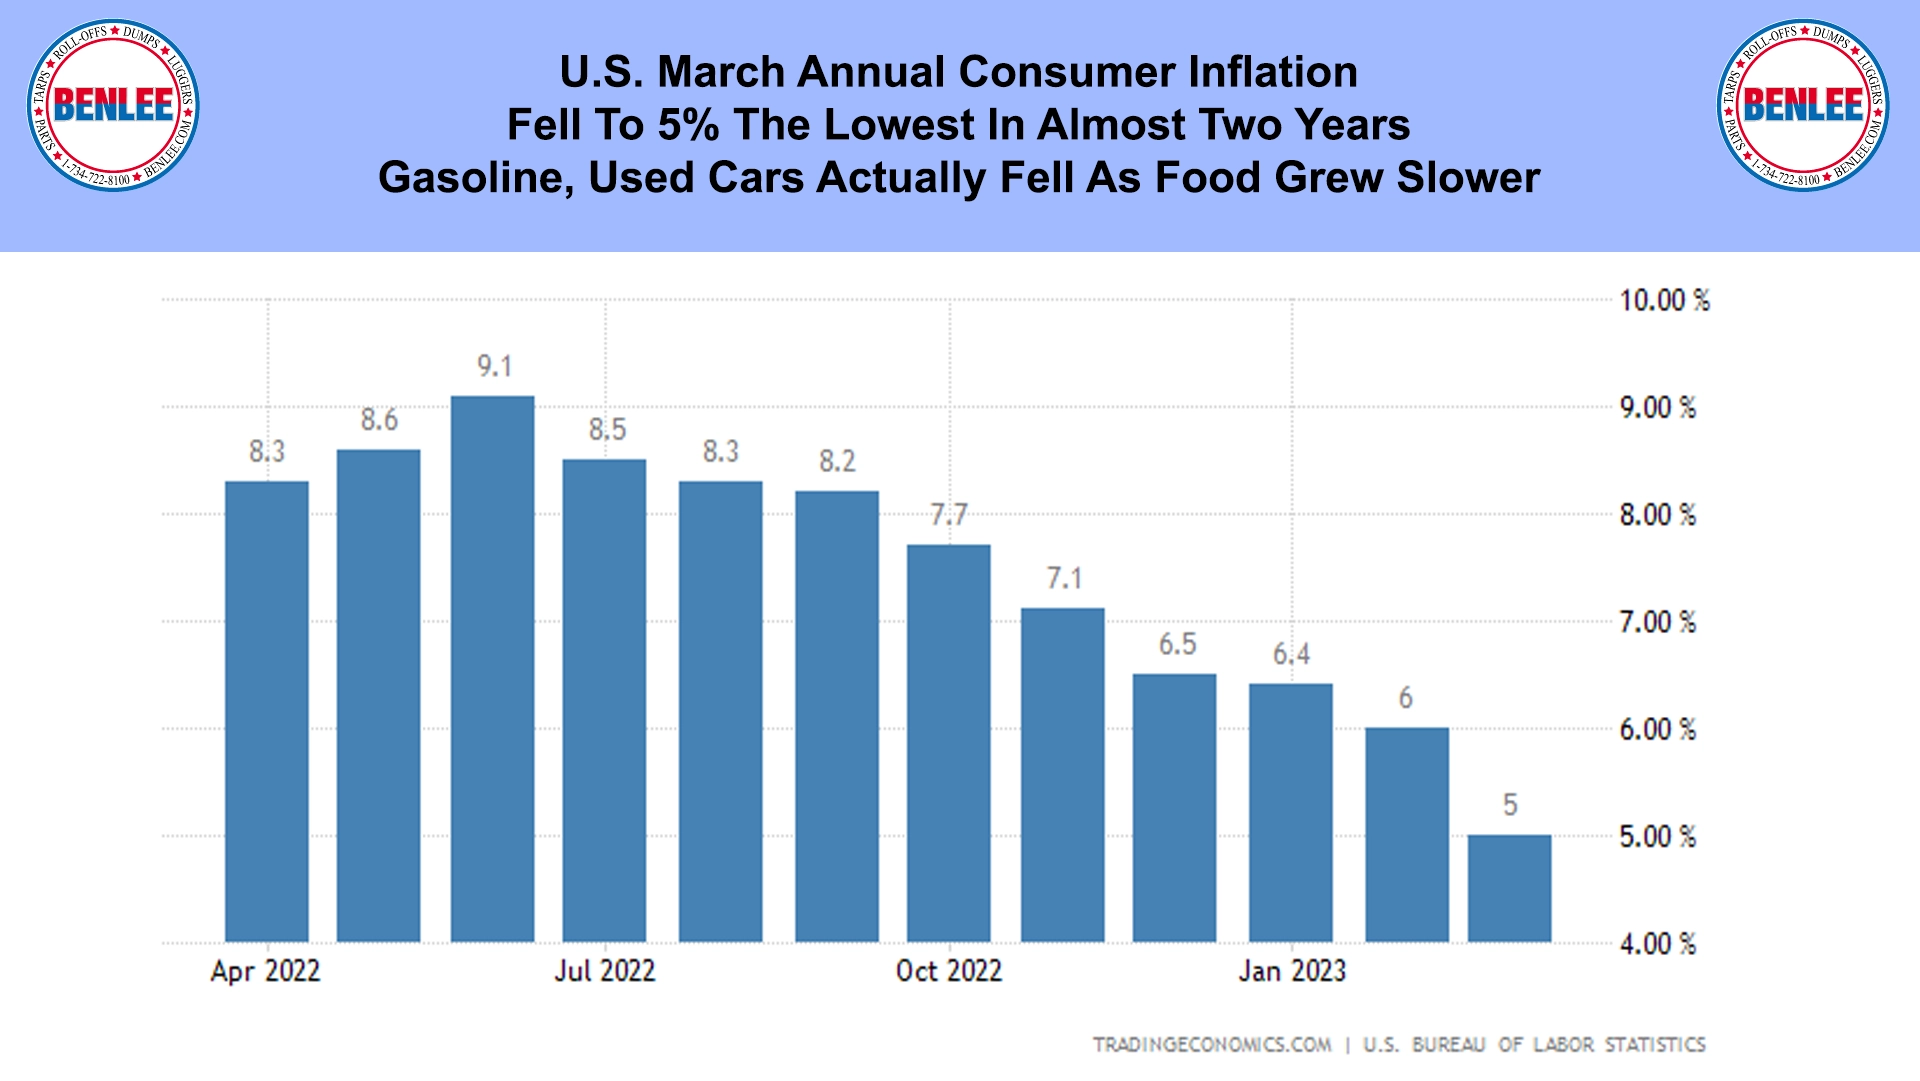 U.S. March Annual Consumer Inflation